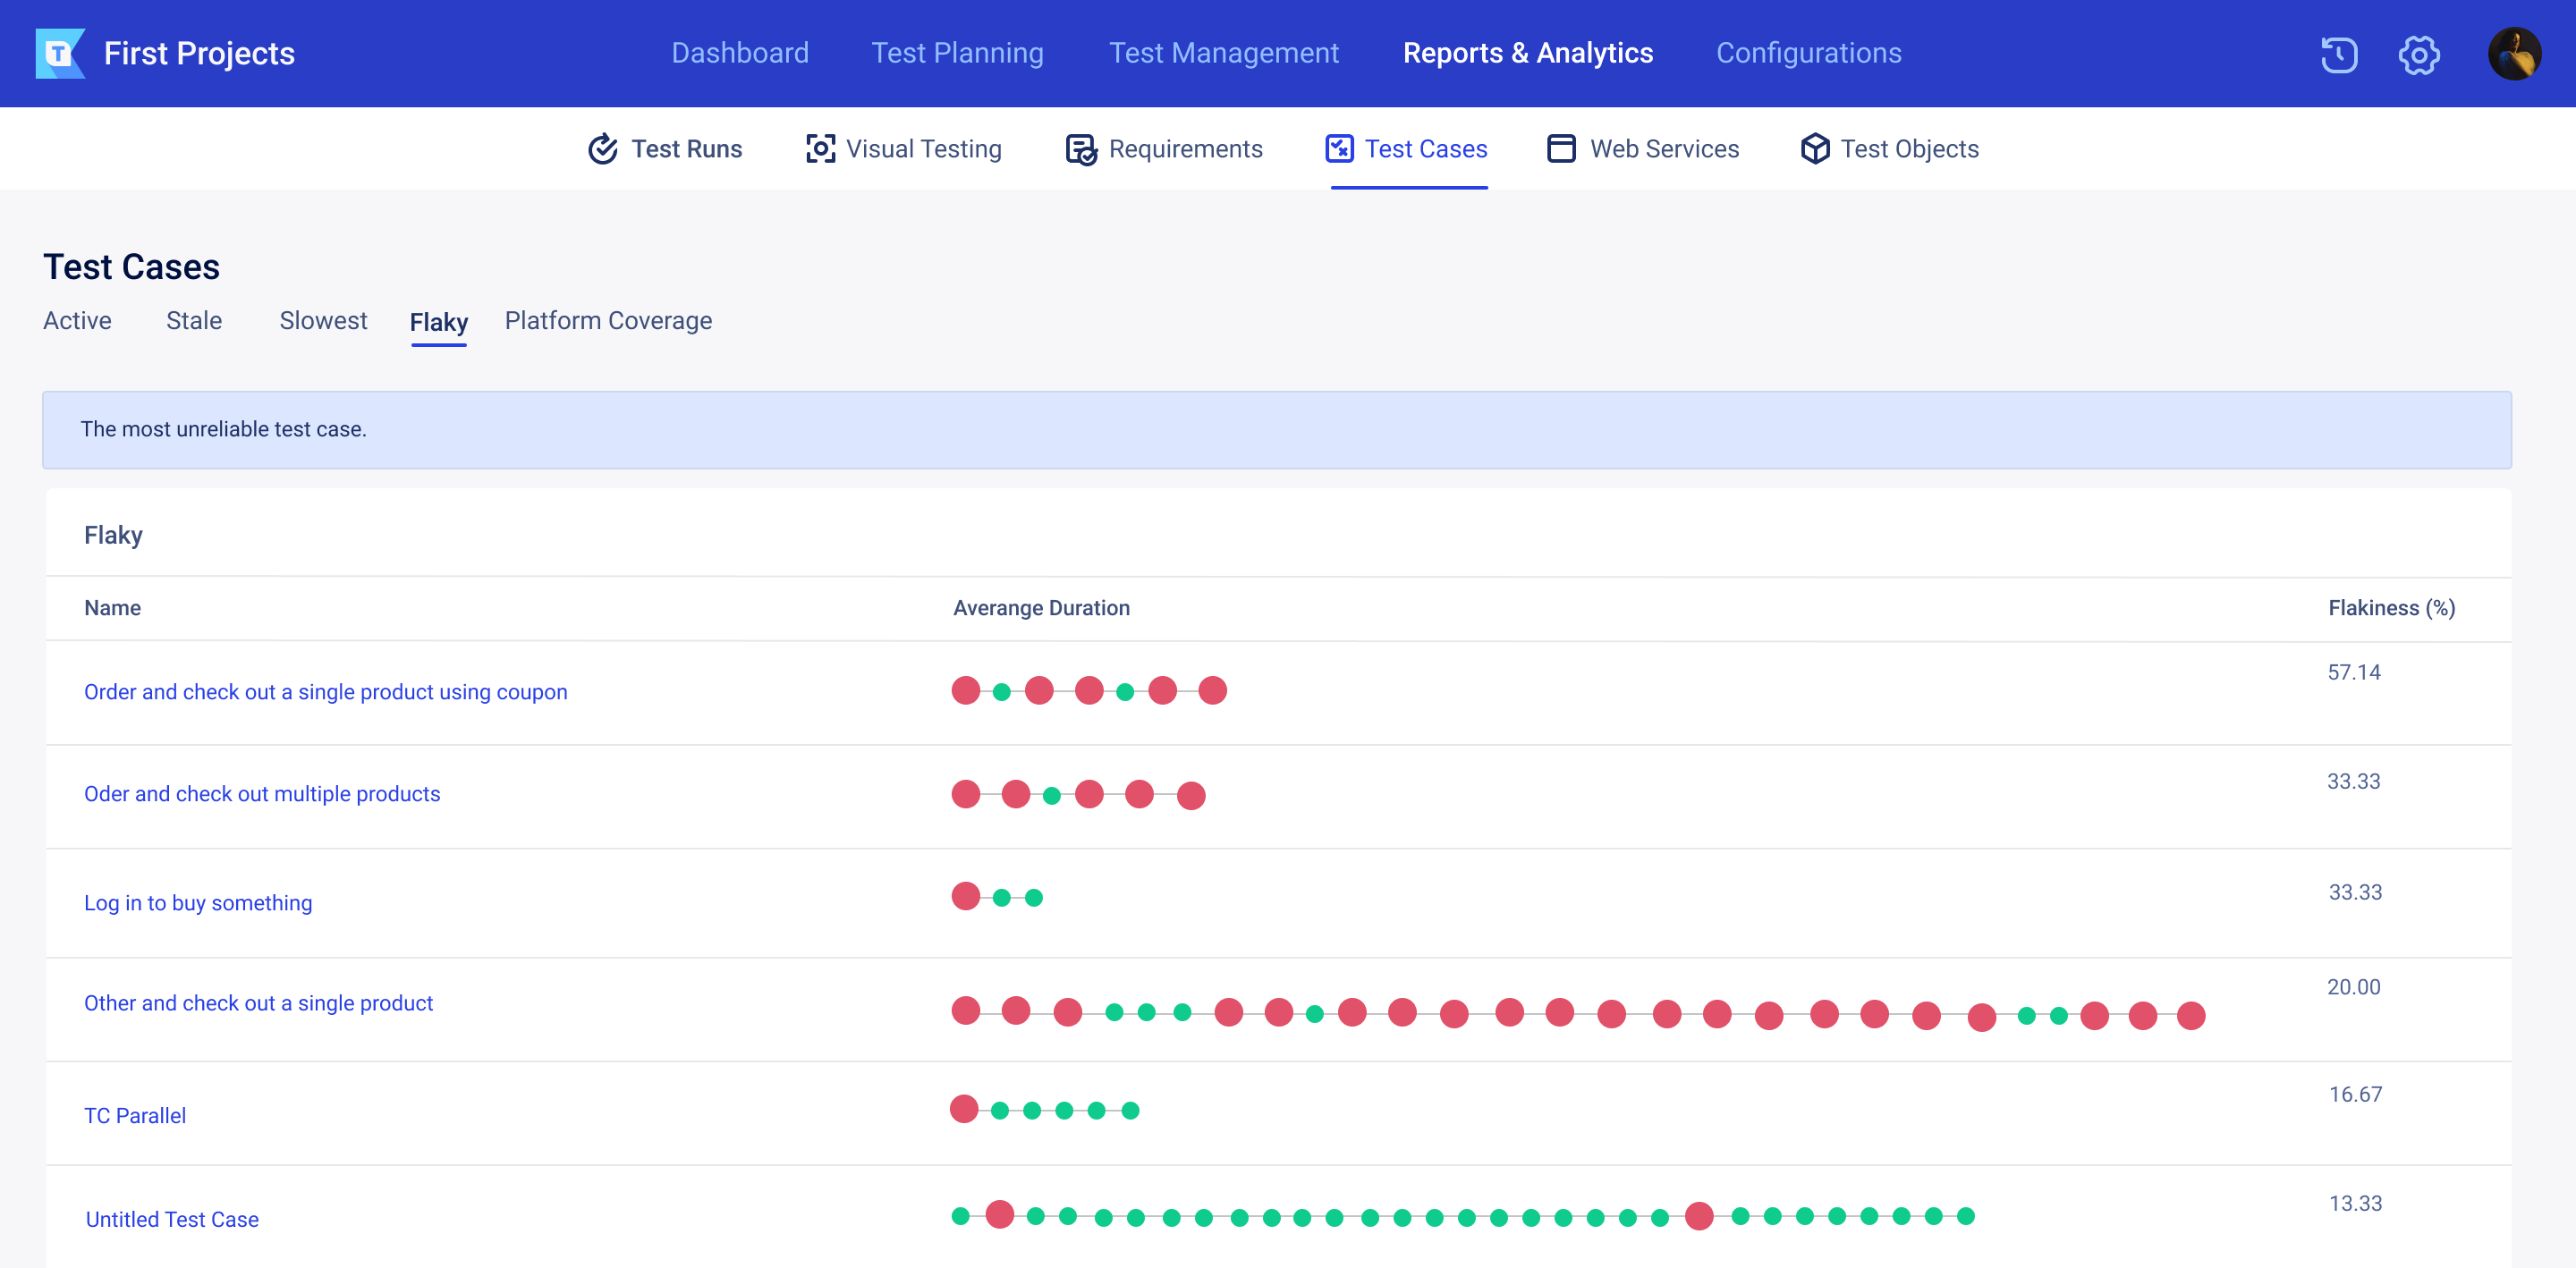 TestOps Flaky Report | Smart Reporting in Software Testing